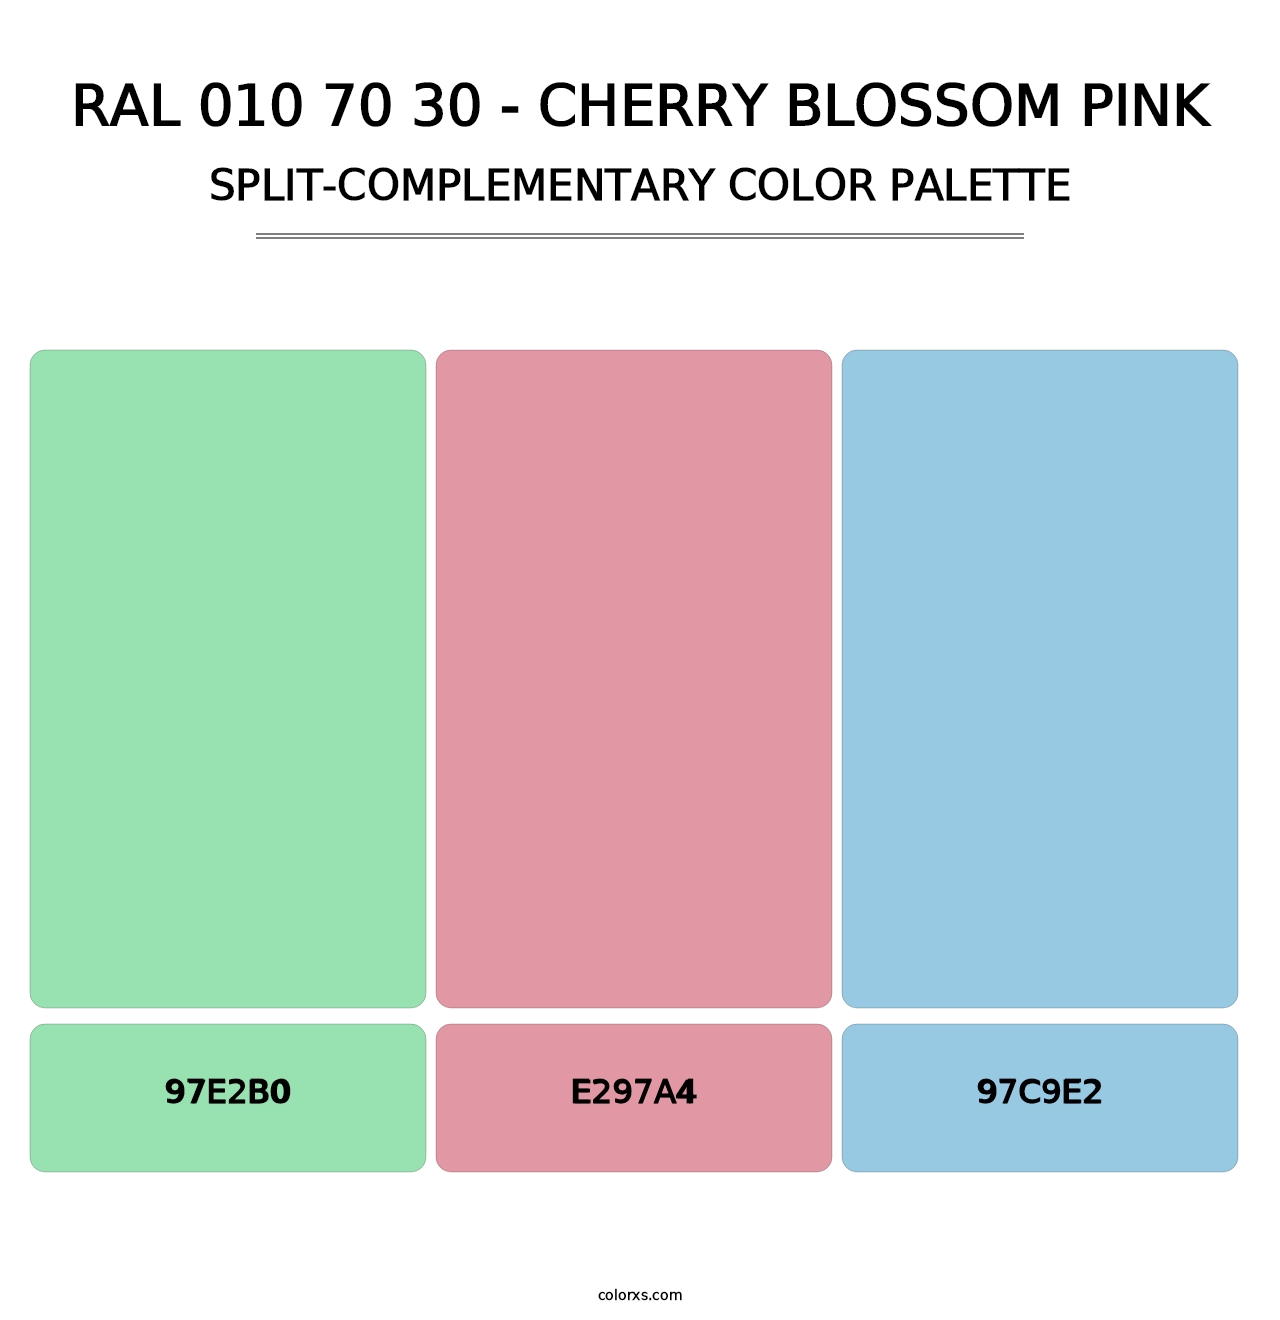 RAL 010 70 30 - Cherry Blossom Pink - Split-Complementary Color Palette